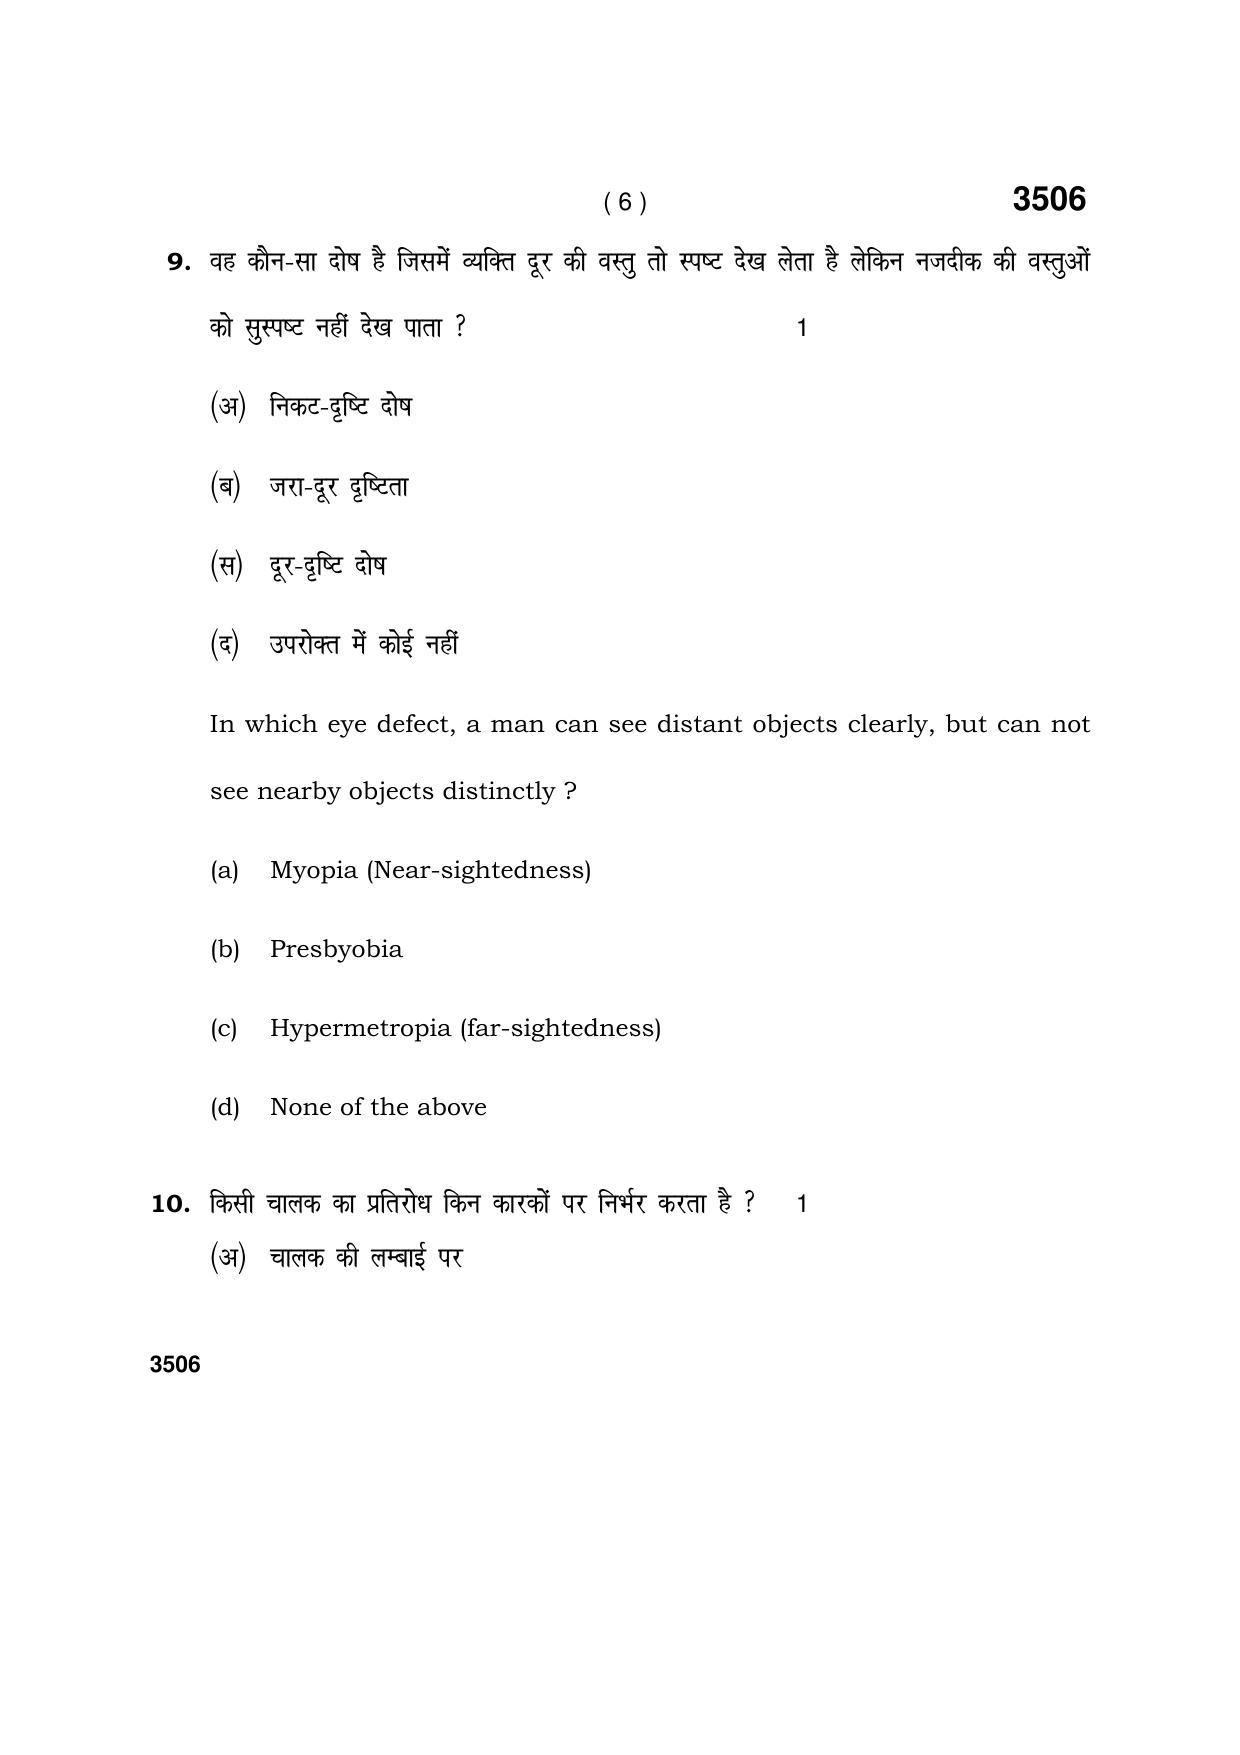 Haryana Board HBSE Class 10 Science (V C C) 2018 Question Paper - Page 6